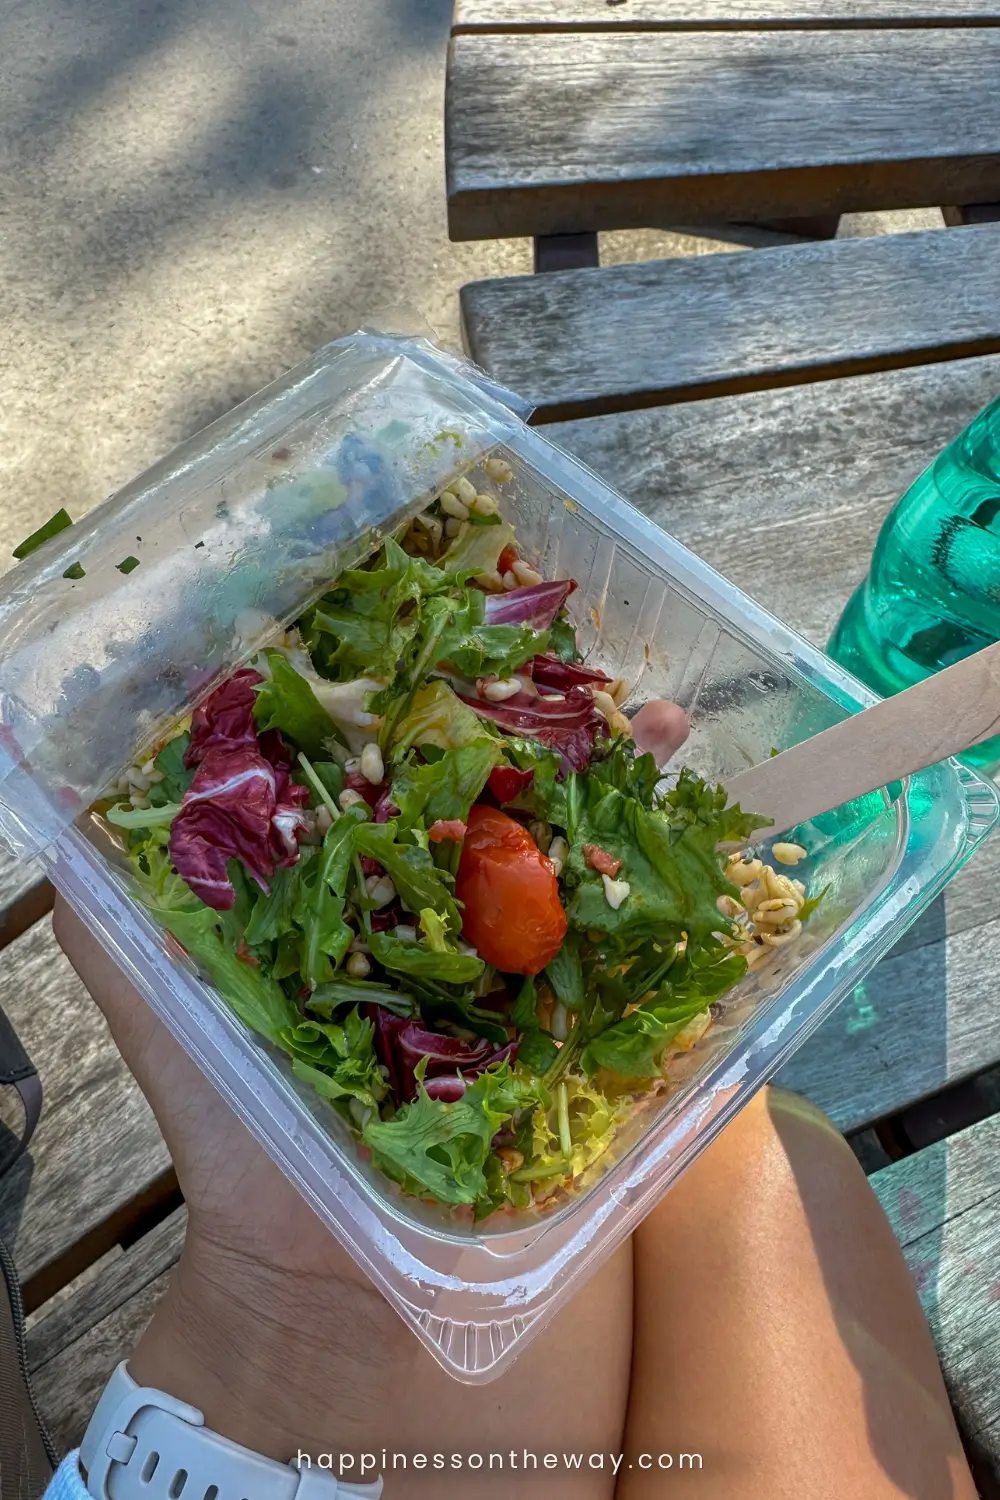 A personal perspective of a fresh salad in a take-out container, held over knees with a wooden fork, ready to eat. A green water bottle and wooden bench in the background suggest a casual outdoor meal in a park in Paris.